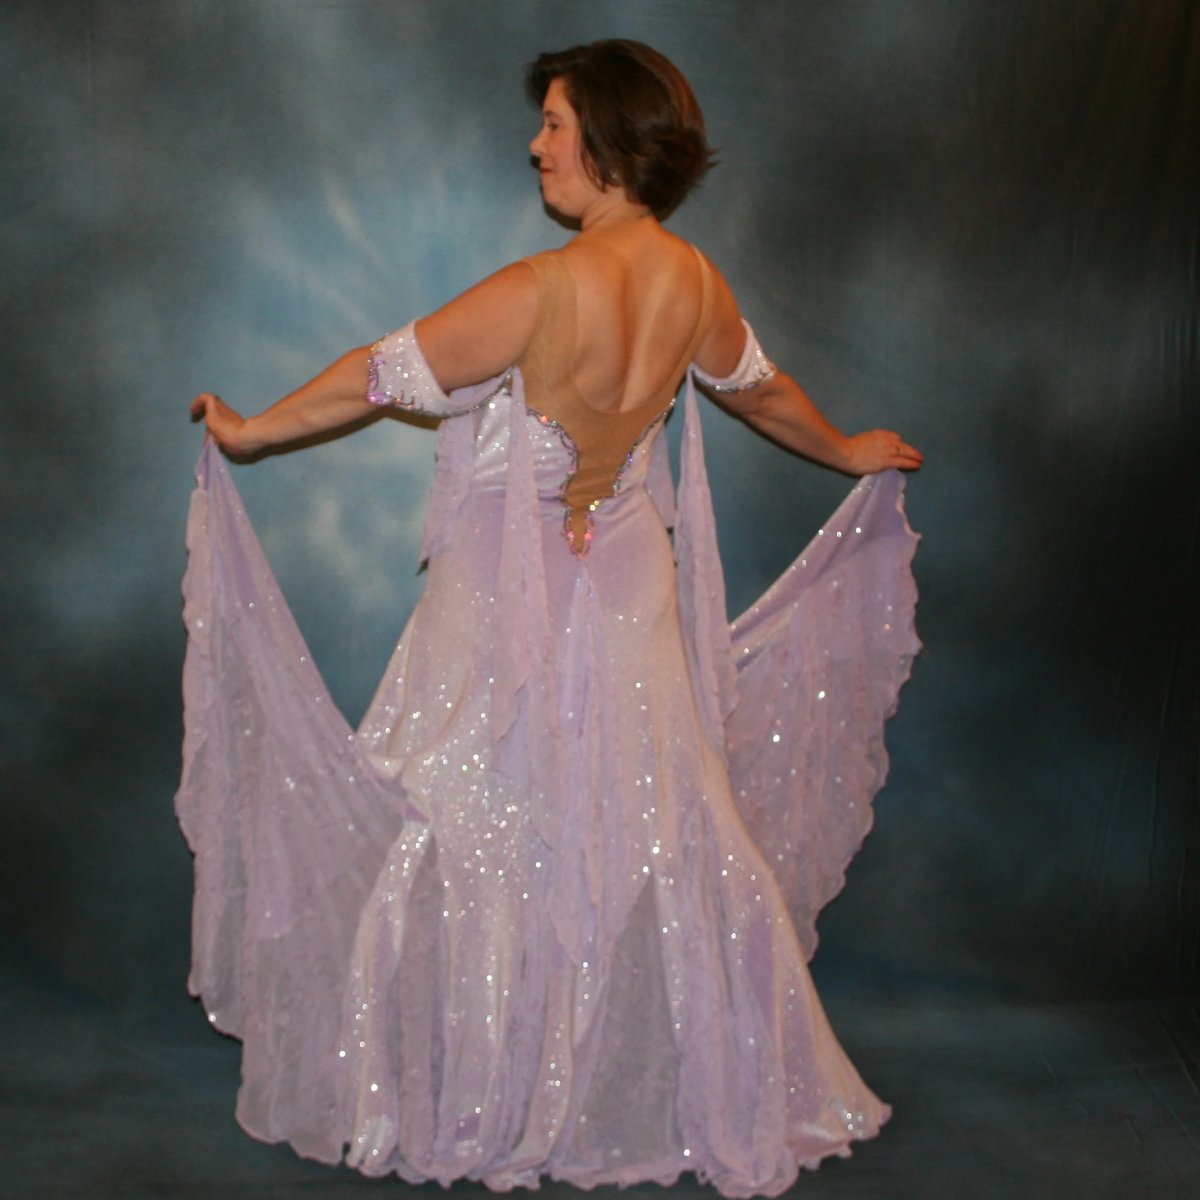 Crystal's Creations back view of Orchid ballroom dress created from luxurious glitter stretch velvet on nude illusion base with embroidered sequined chiffon insets & floats, embellished with crystal vitrail light Swarovski rhinestone work